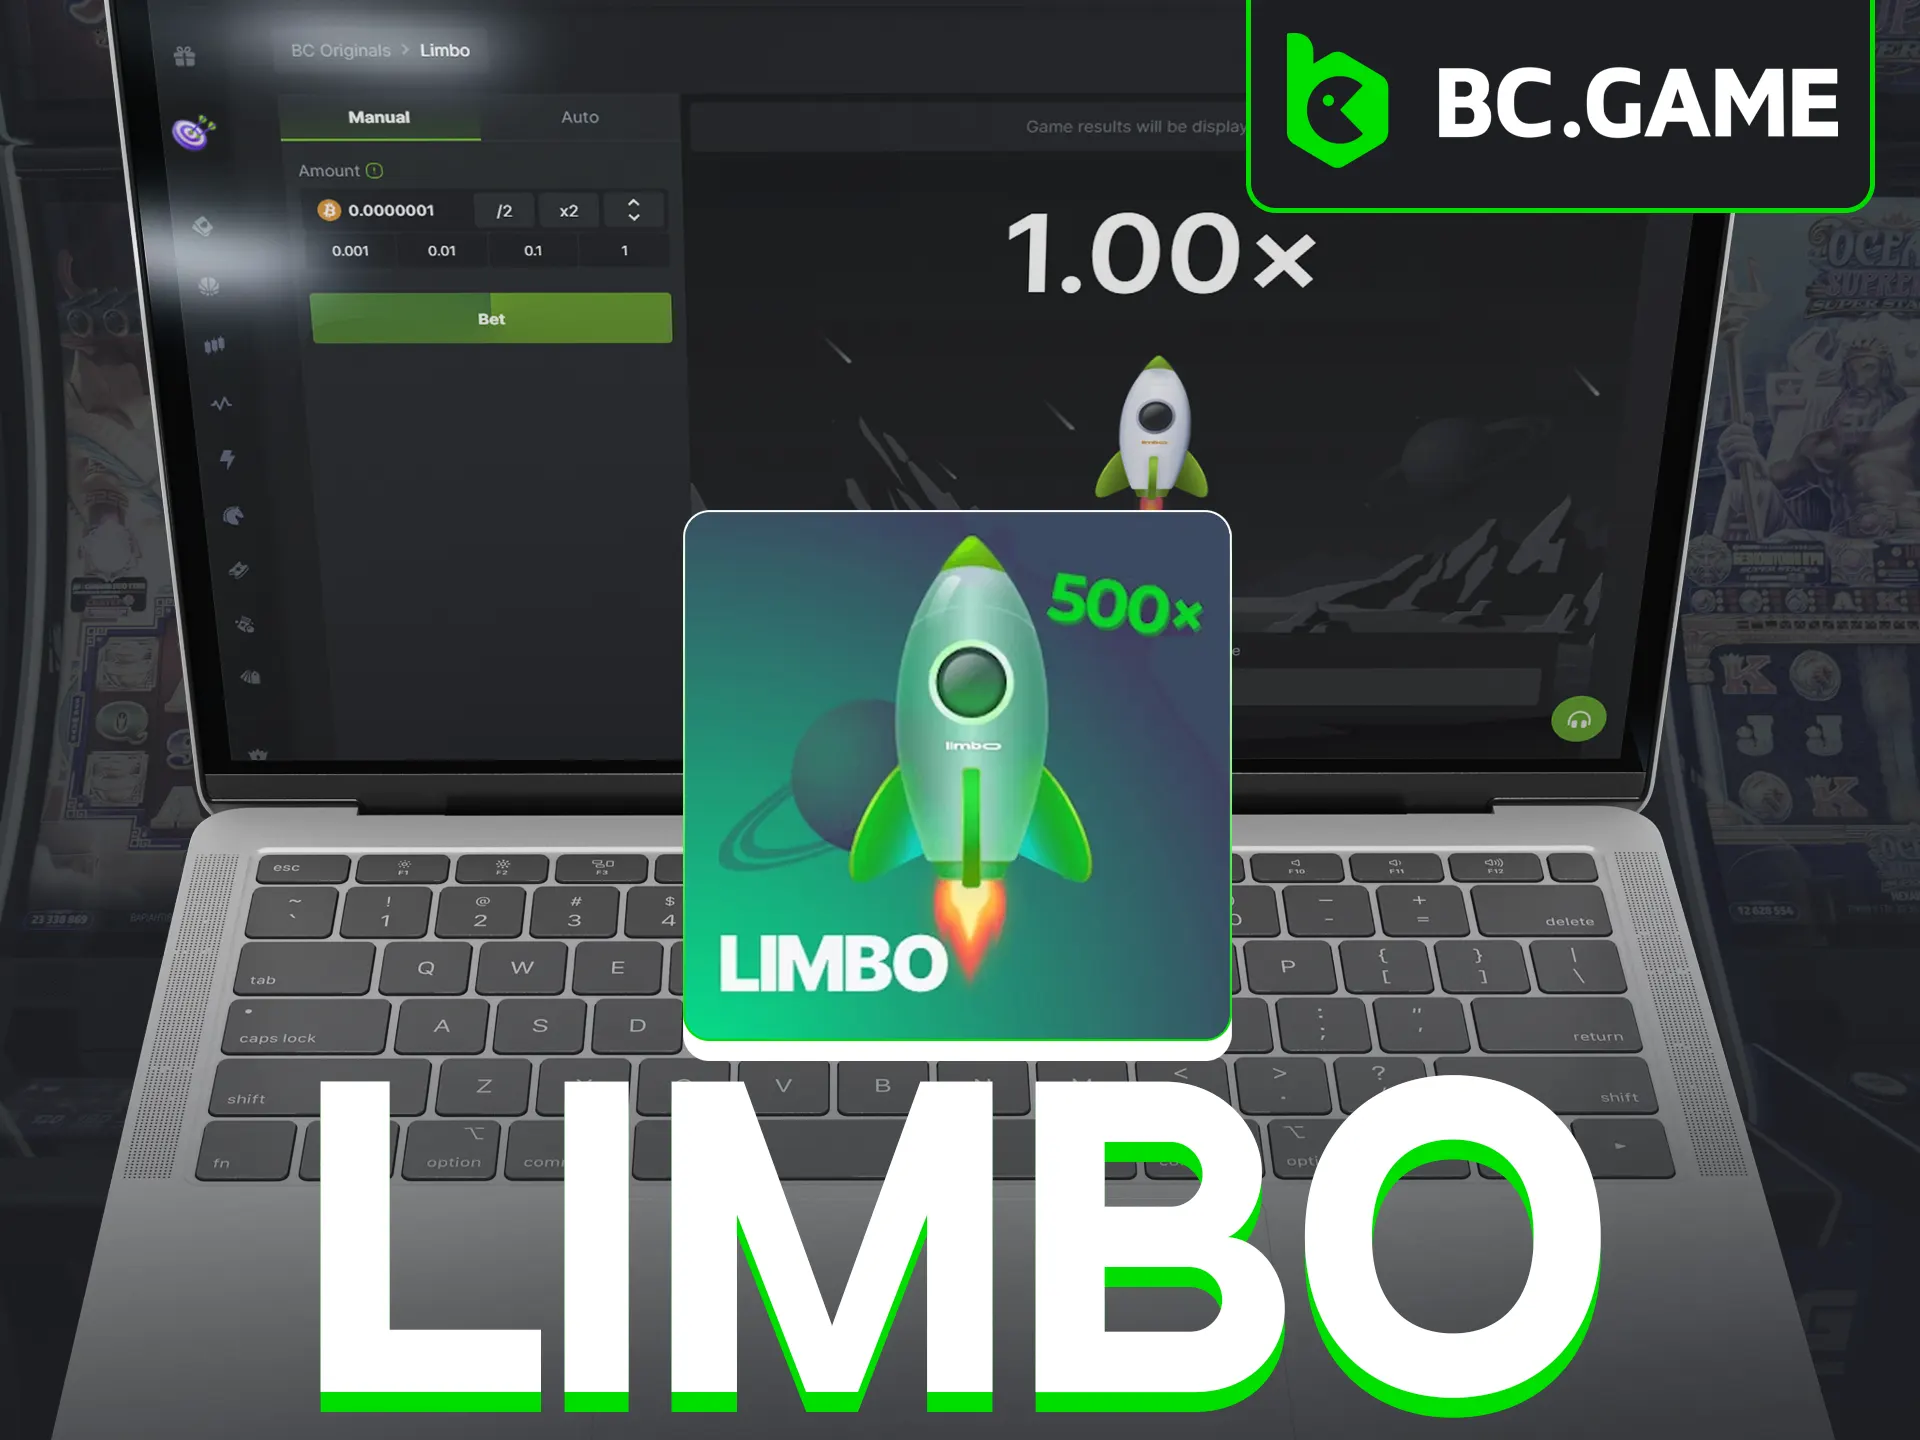 Play Limbo in BC Originals, cash out before collapse.